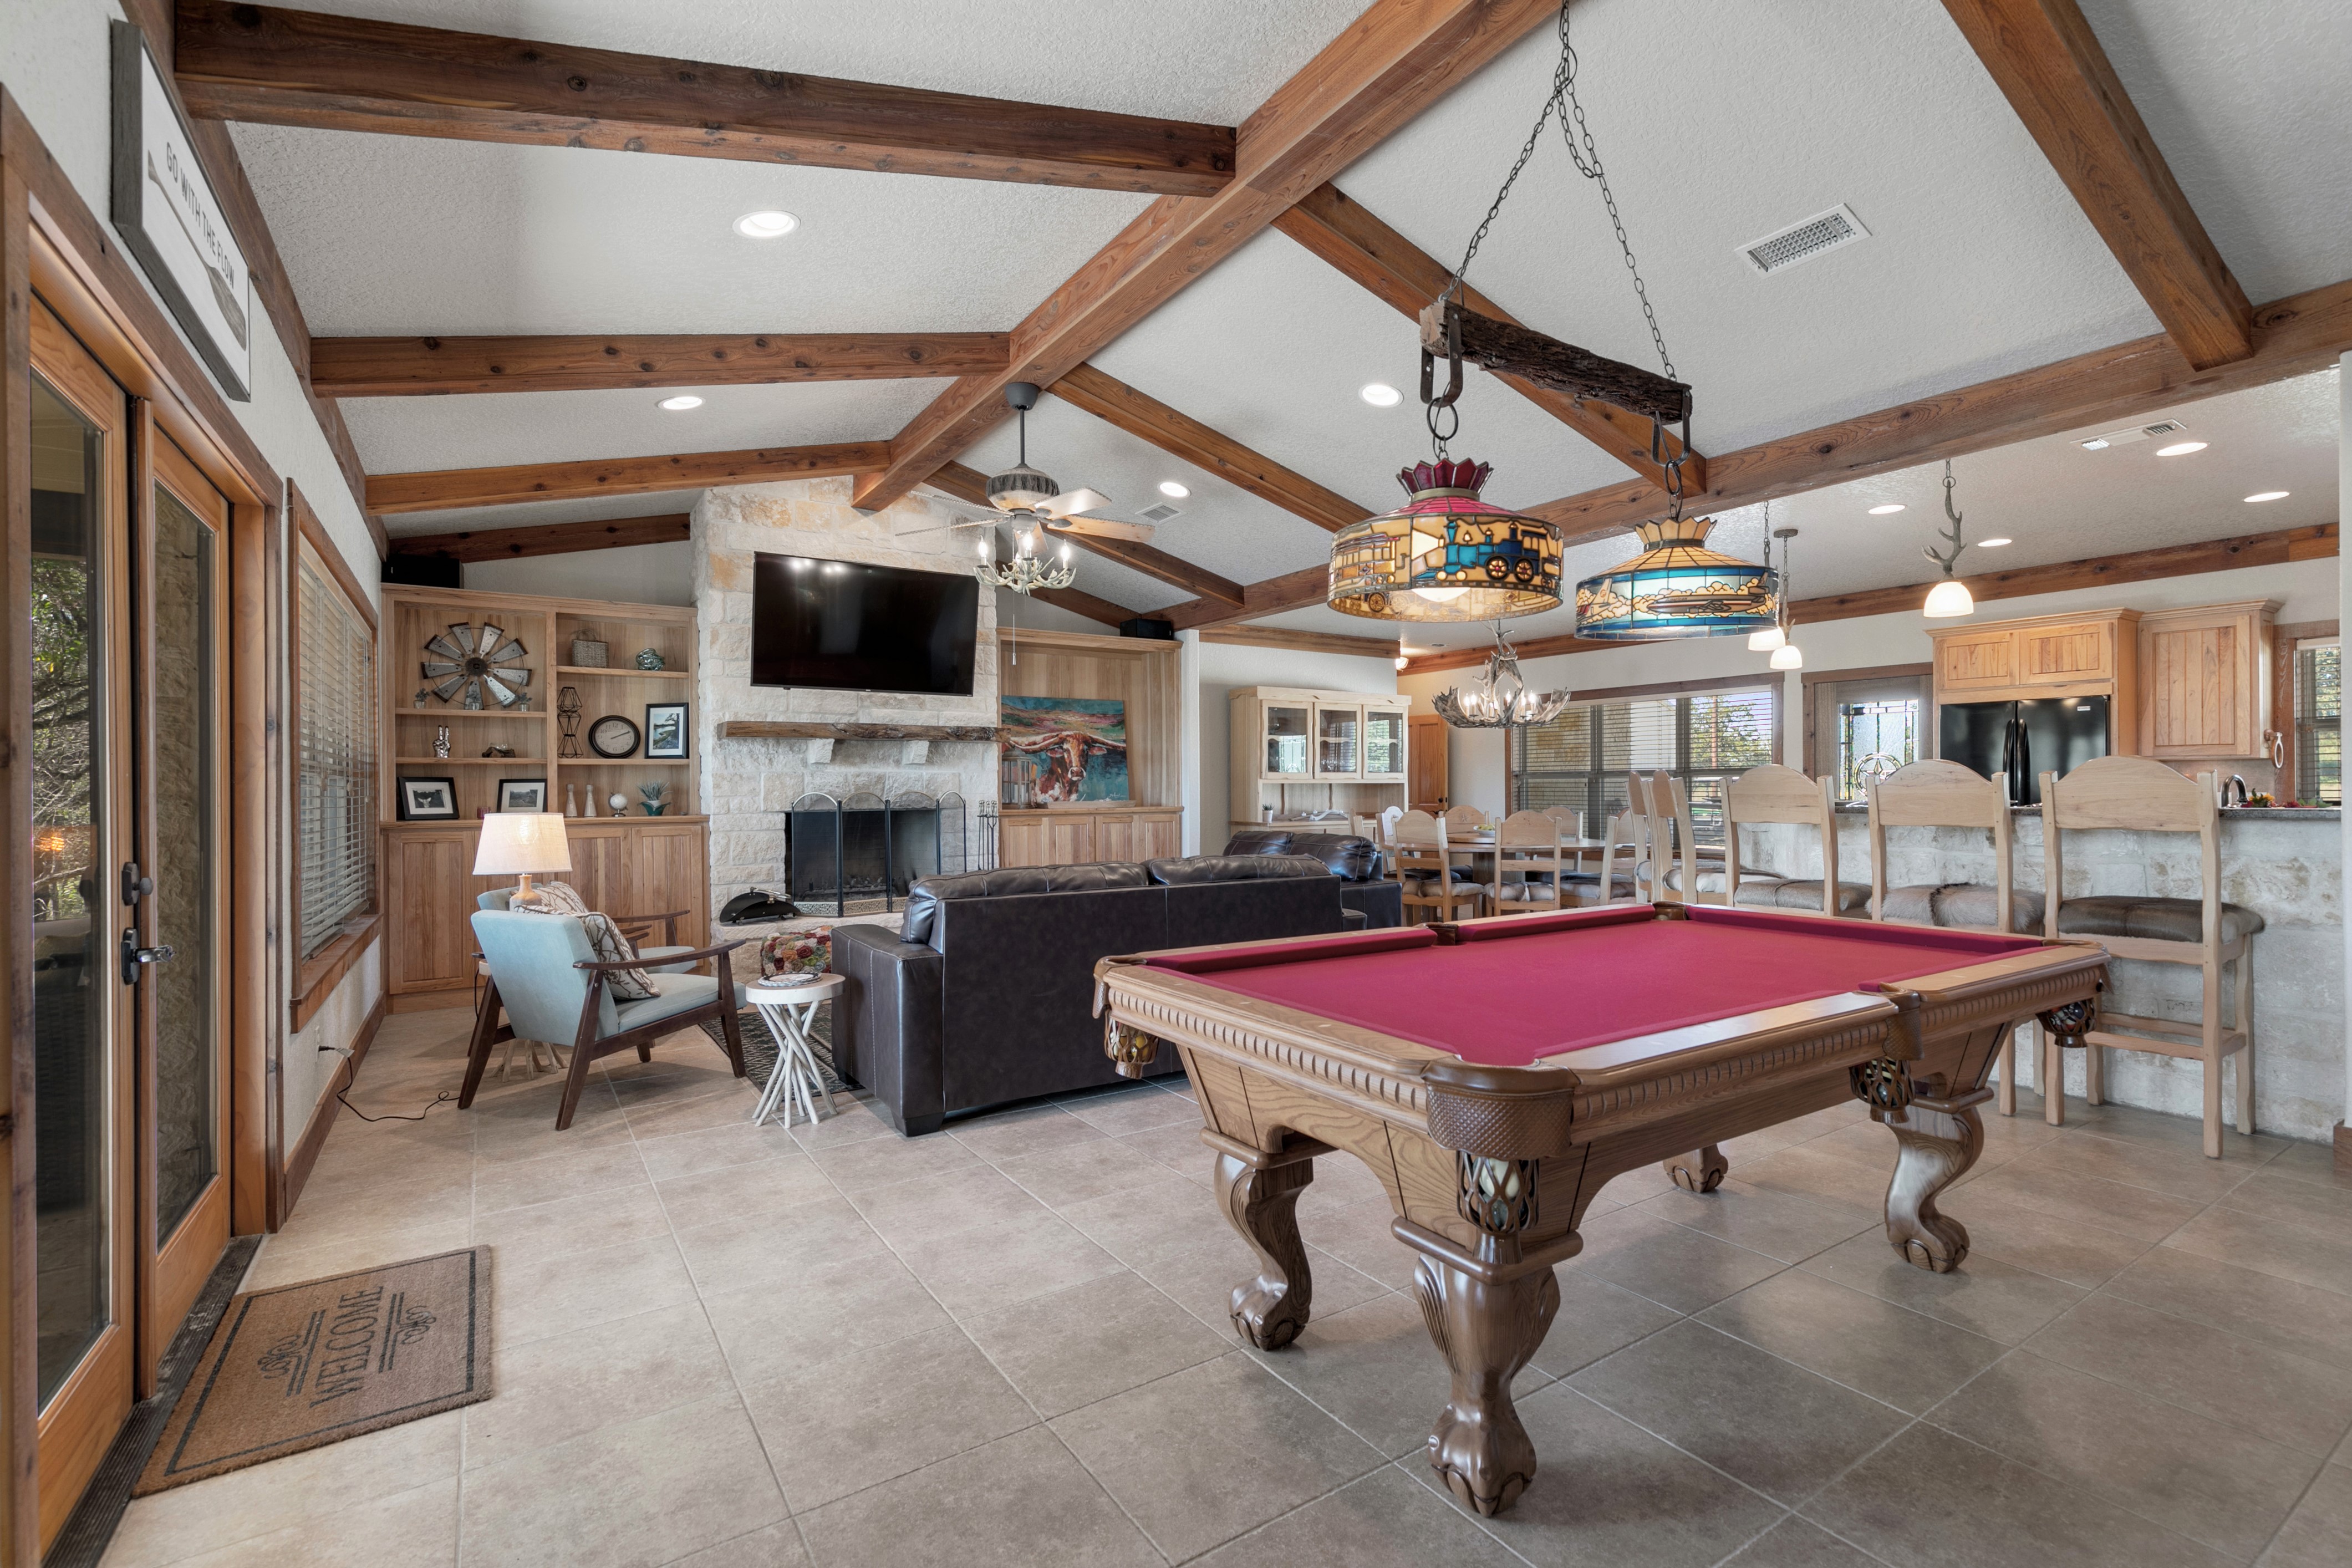 Play a game of Pool or kick back relax and watch a movie.